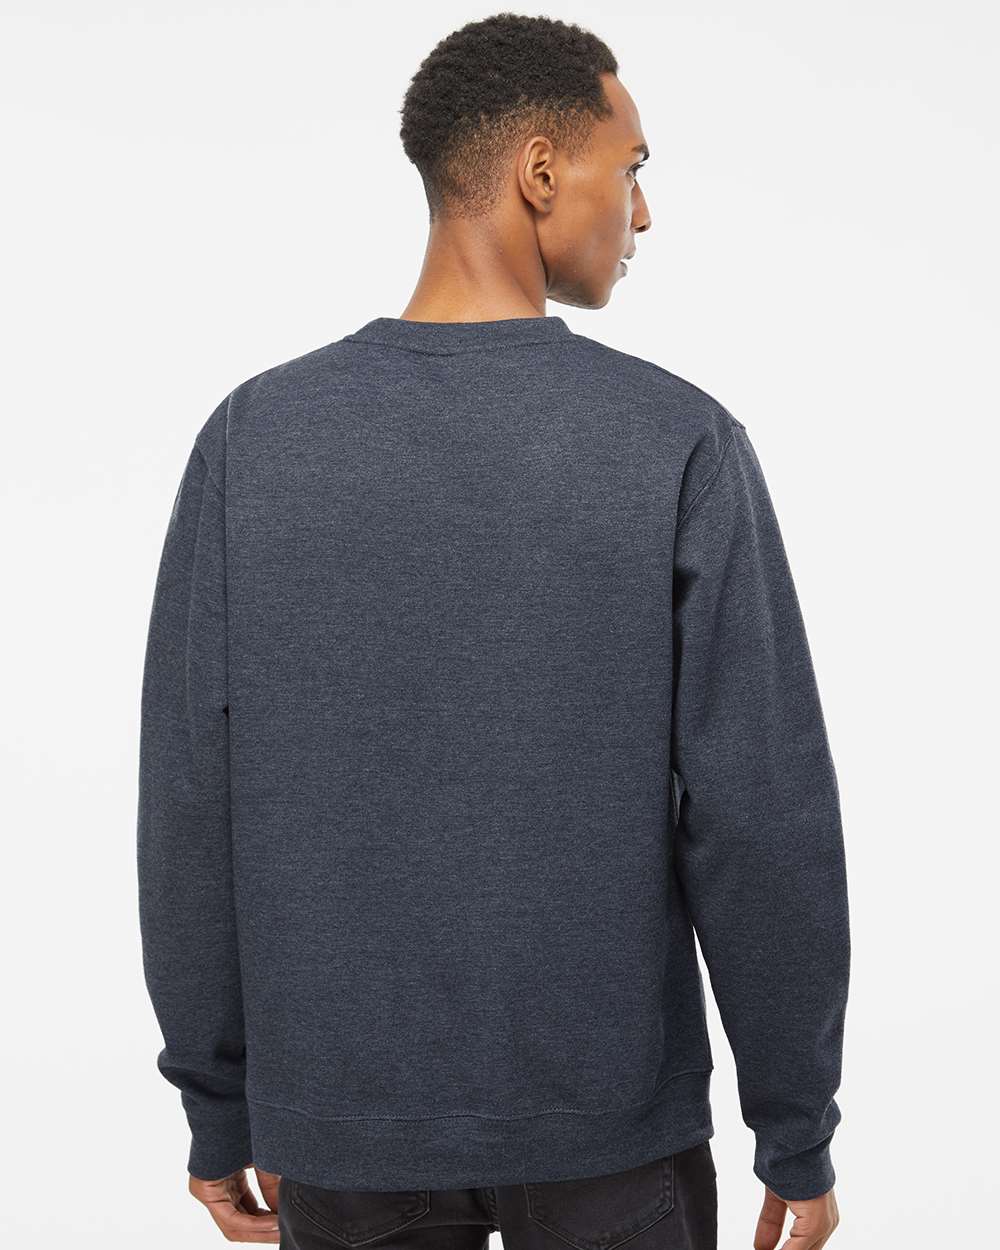 Independent Trading Co. Midweight Sweatshirt SS3000 #colormdl_Classic Navy Heather